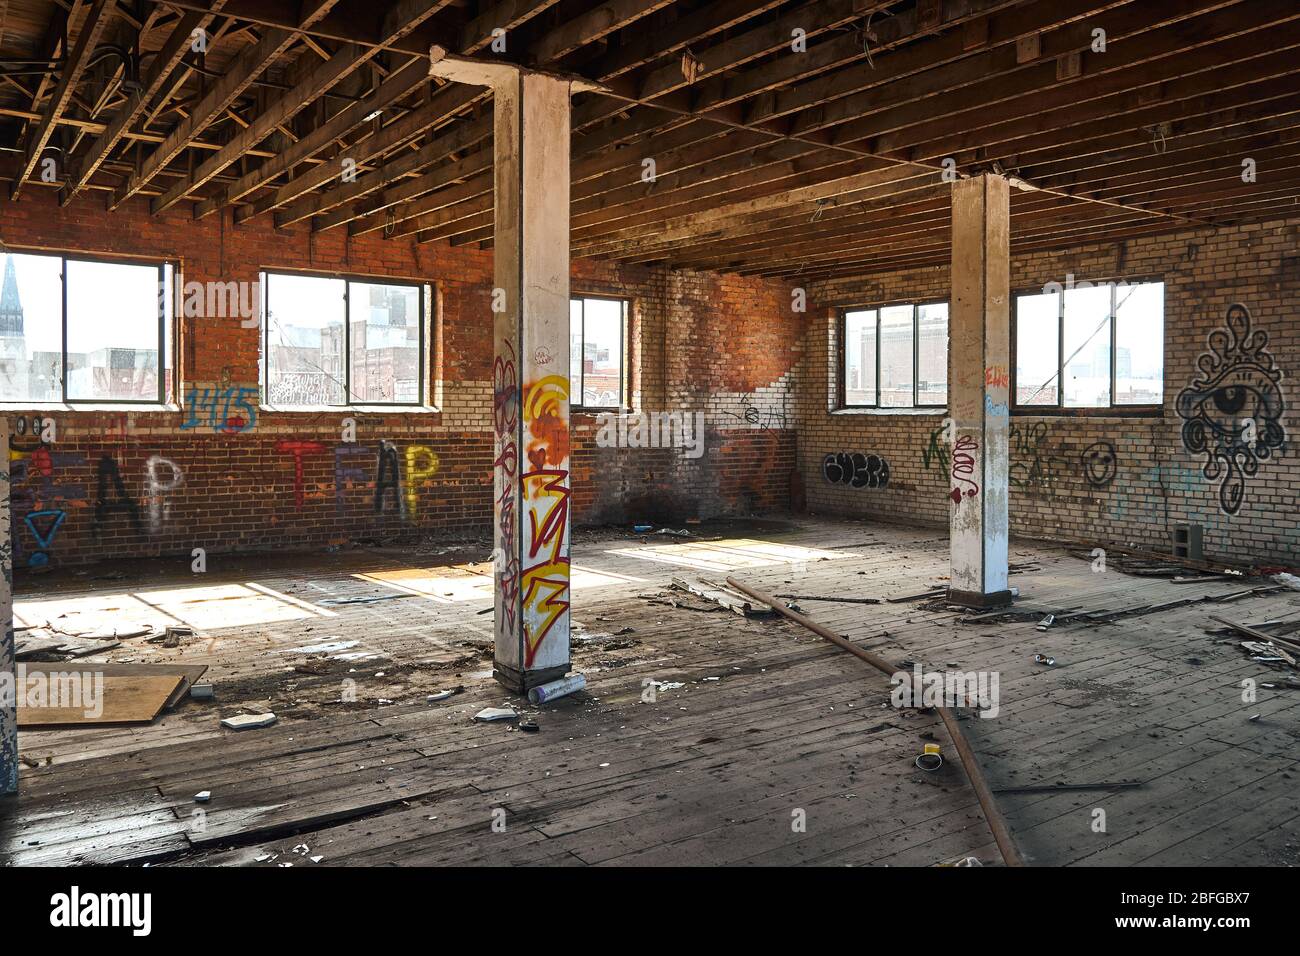 Photograph of interior of abandoned building in Detroit Michigan showing evidence of homeless and graffiti spray painted on walls Stock Photo